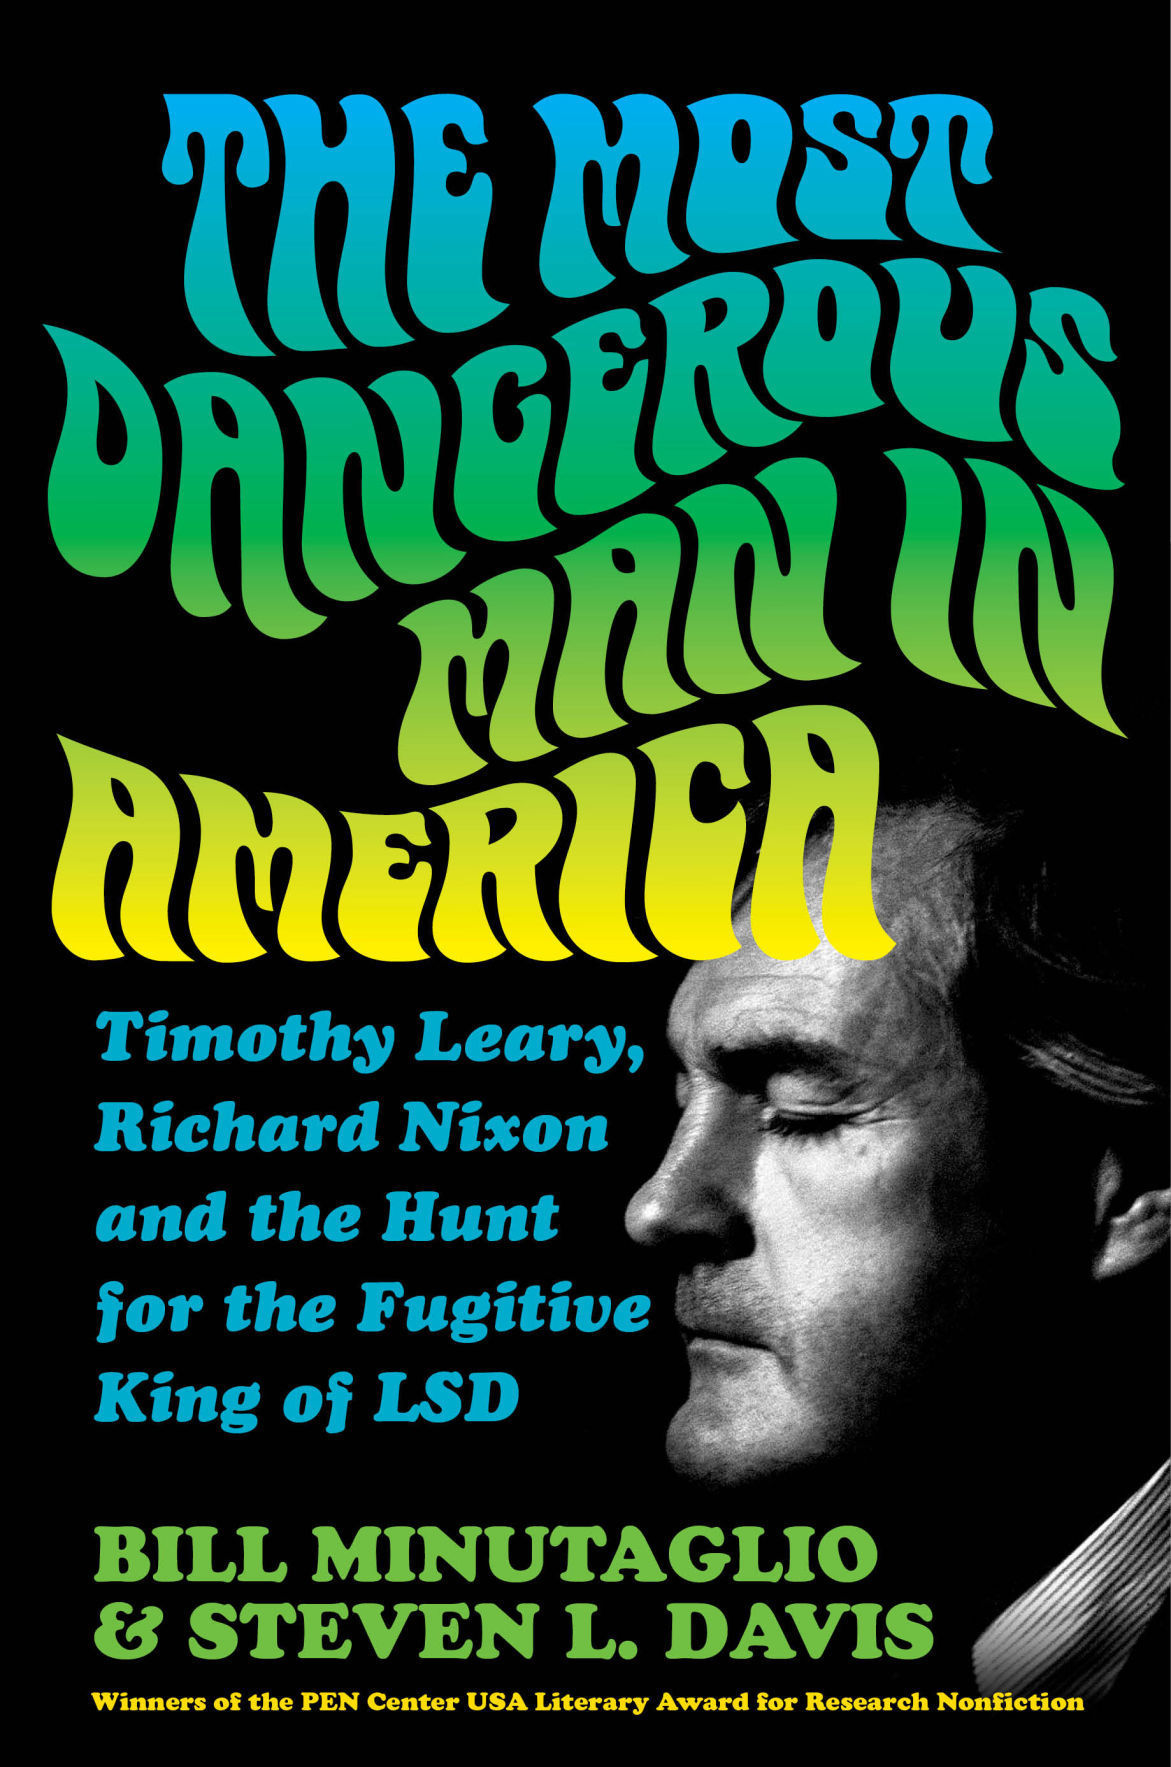 The-Most-Dangerous-Man-in-America-Timothy-Leary-Richard-Nixon-and-the-Hunt-for-the-Fugitive-King-of-LSD